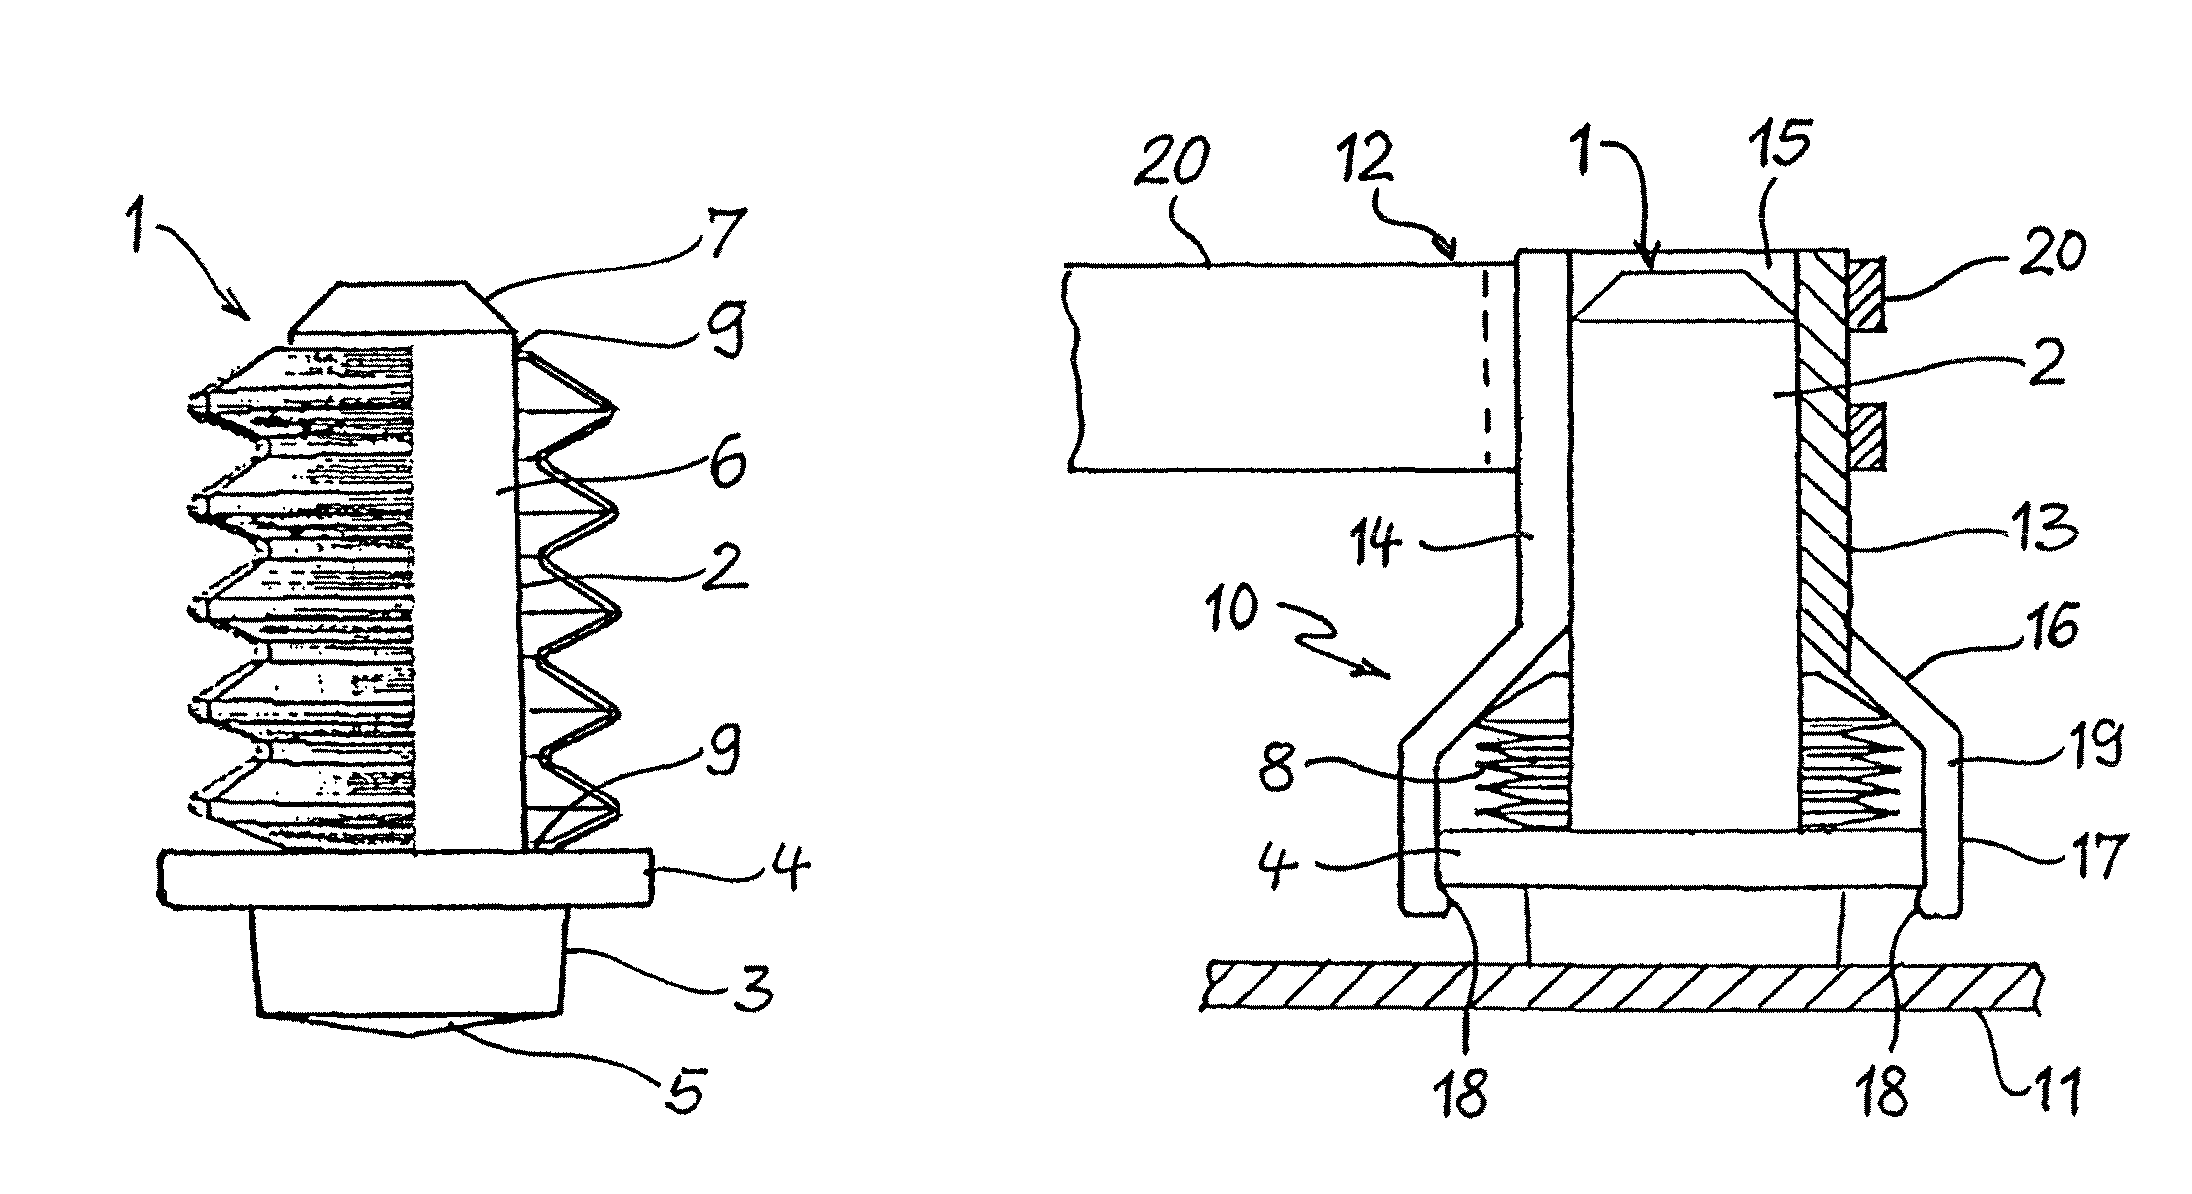 Junction bolt, junction element, and electrically conductive coupling device